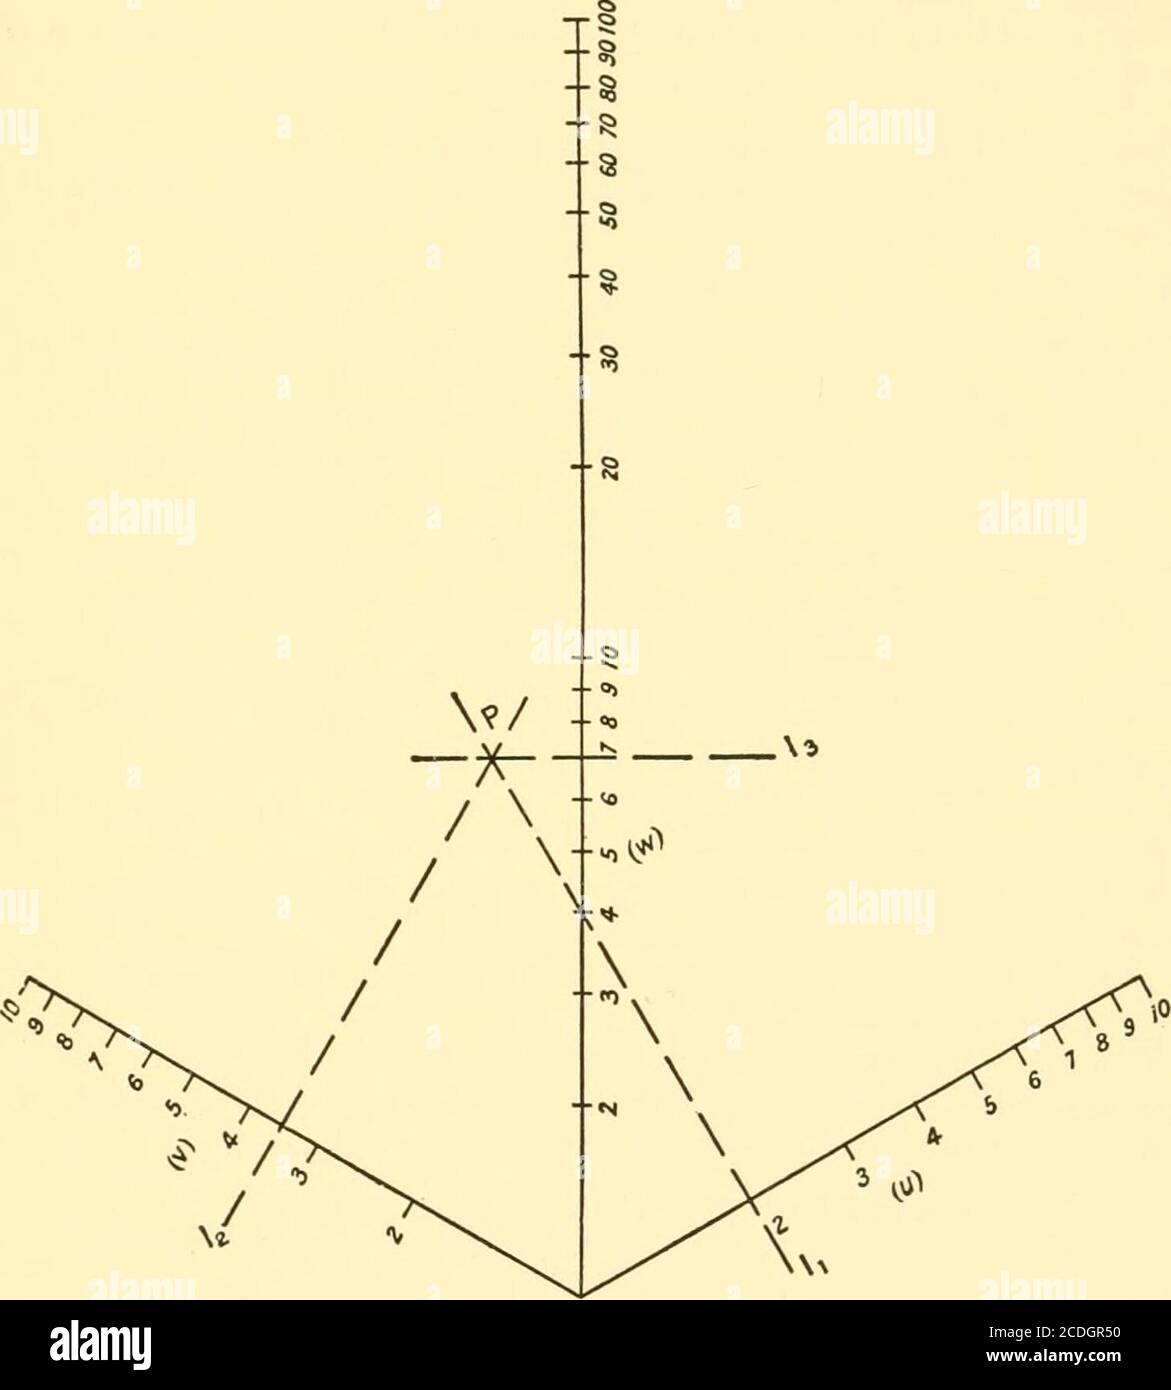 Graphical And Mechanical Computation In 11 1 R S 4 3 U I Fig 21c Angle From Any Point P Draw Pii Ph Ph Perpendicular To Ox Oyand Oz Respectively